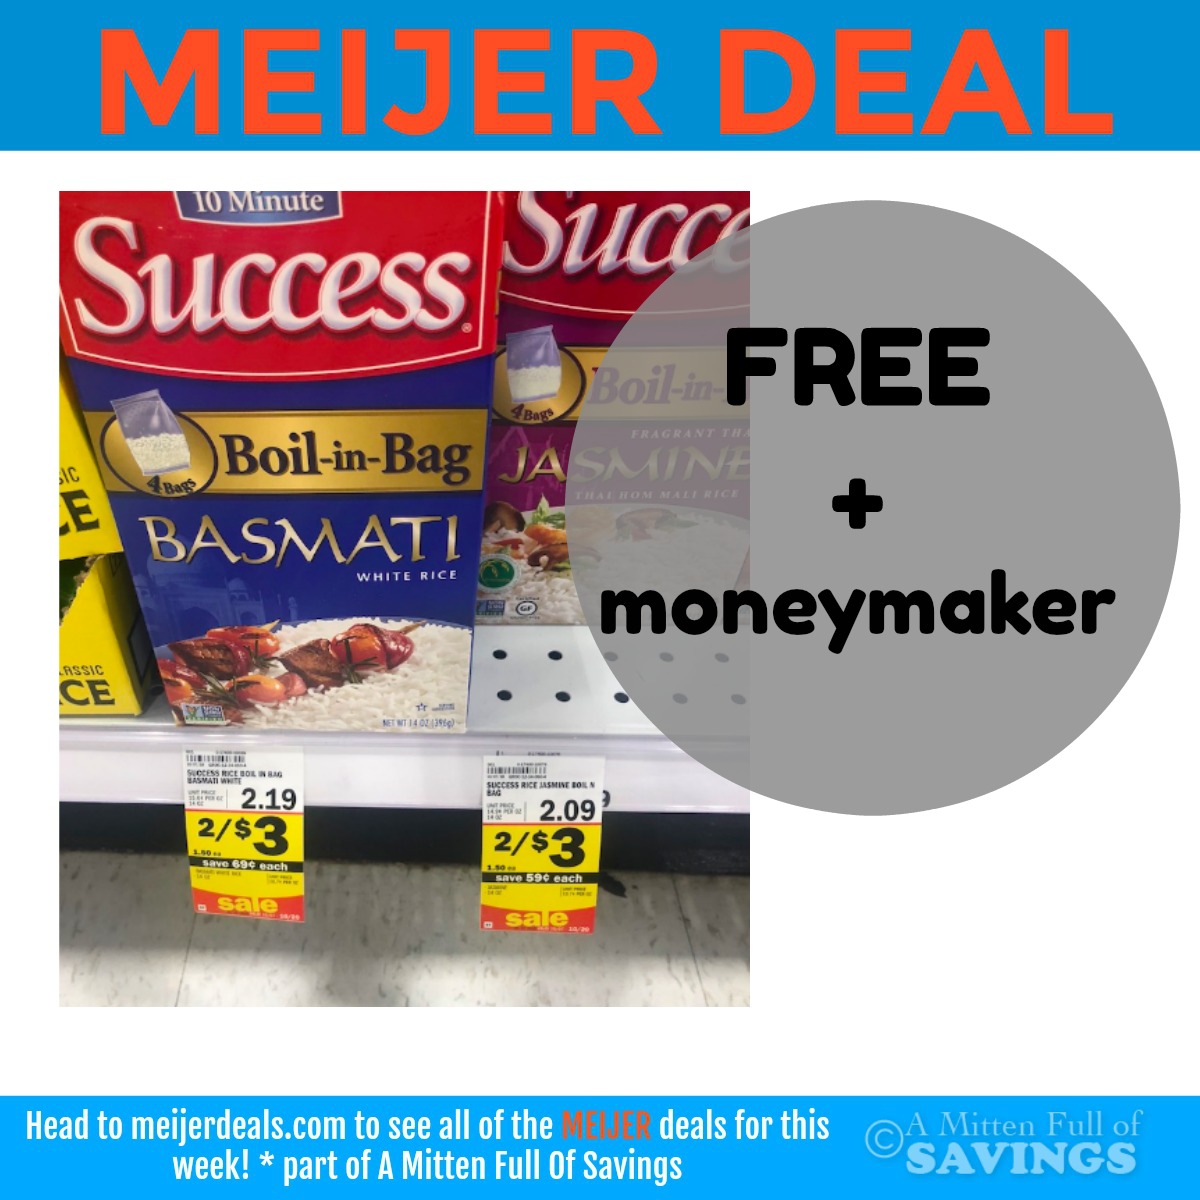 Grab Success Rice for FREE + Moneymaker at Meijer